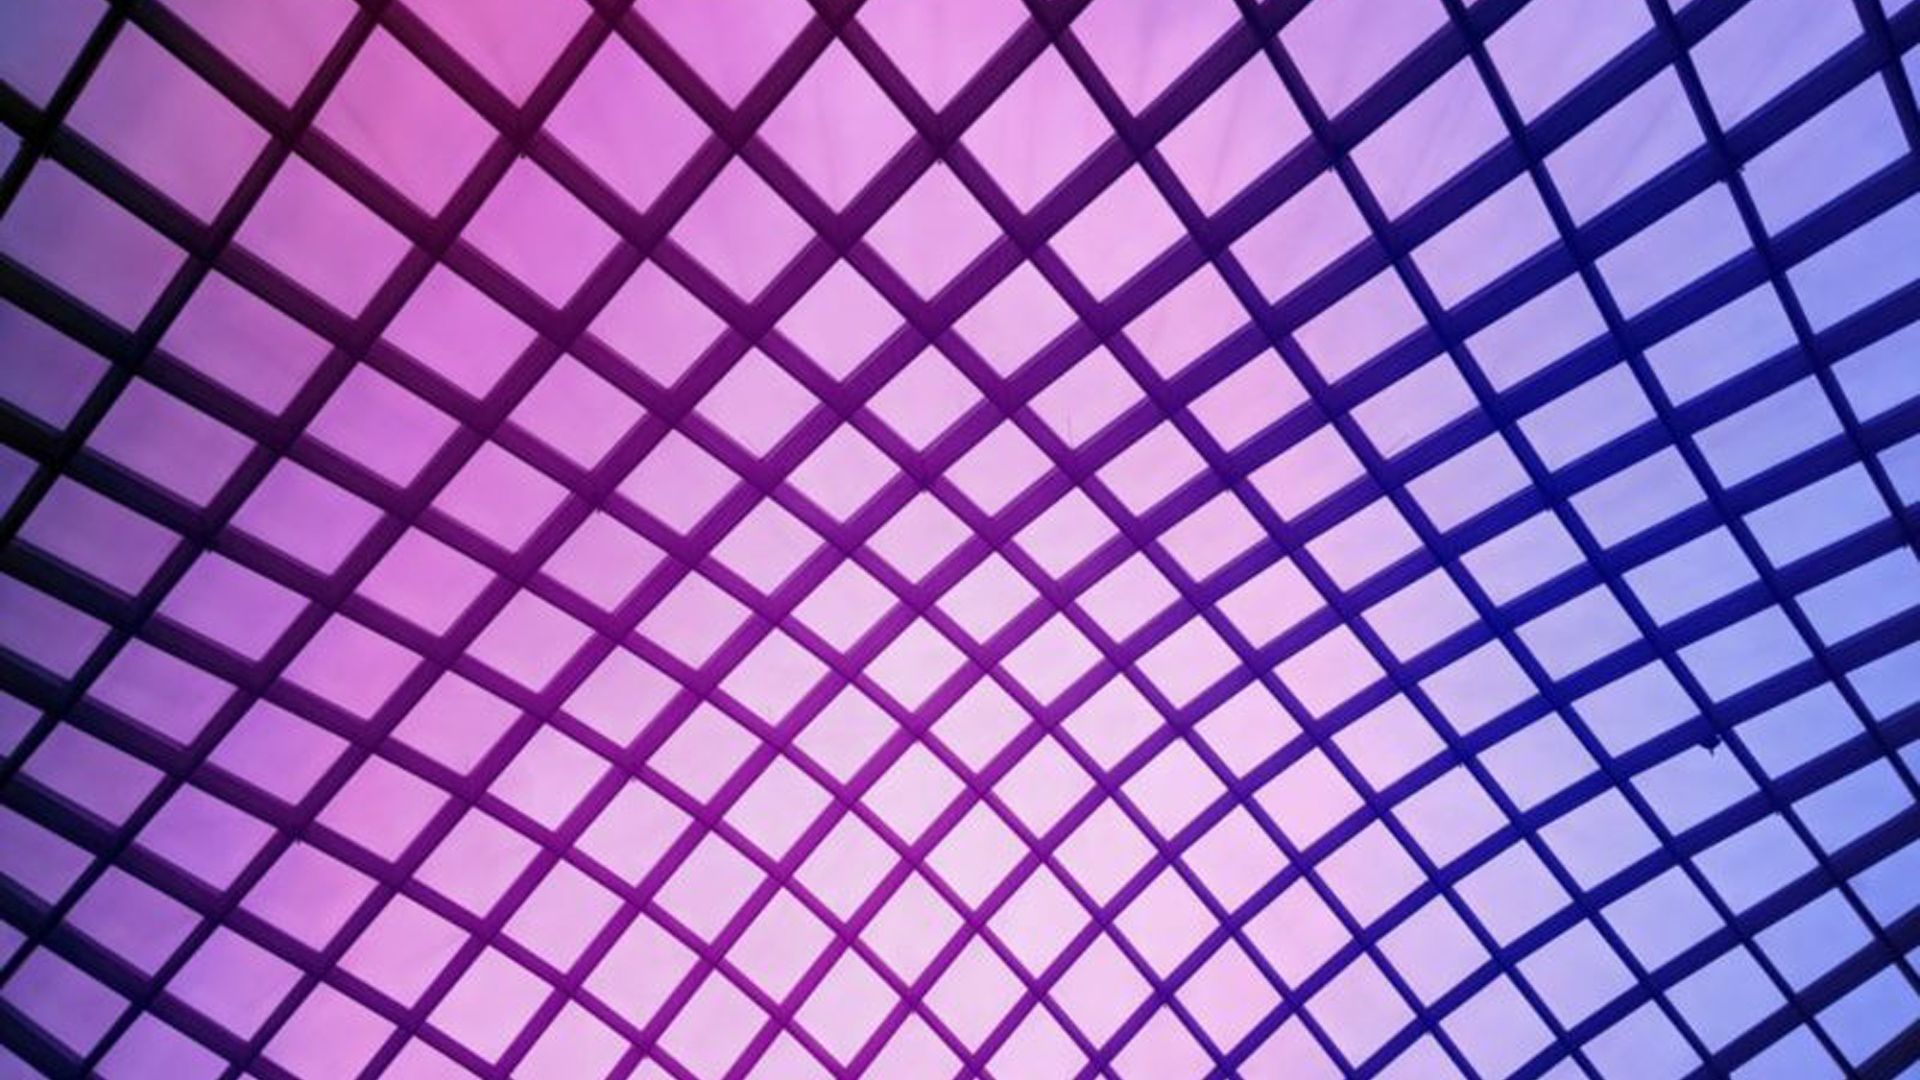 A purple and blue gradient with a grid pattern - Pattern